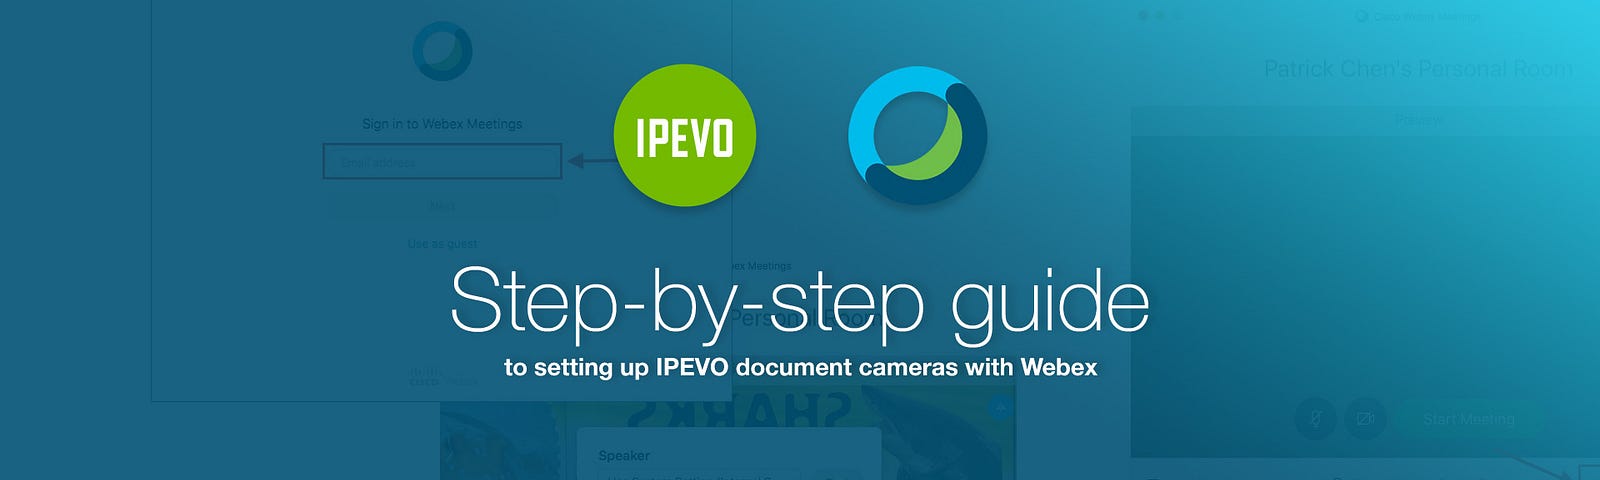 Step-by-step guide to setting up IPEVO document cameras with Webex